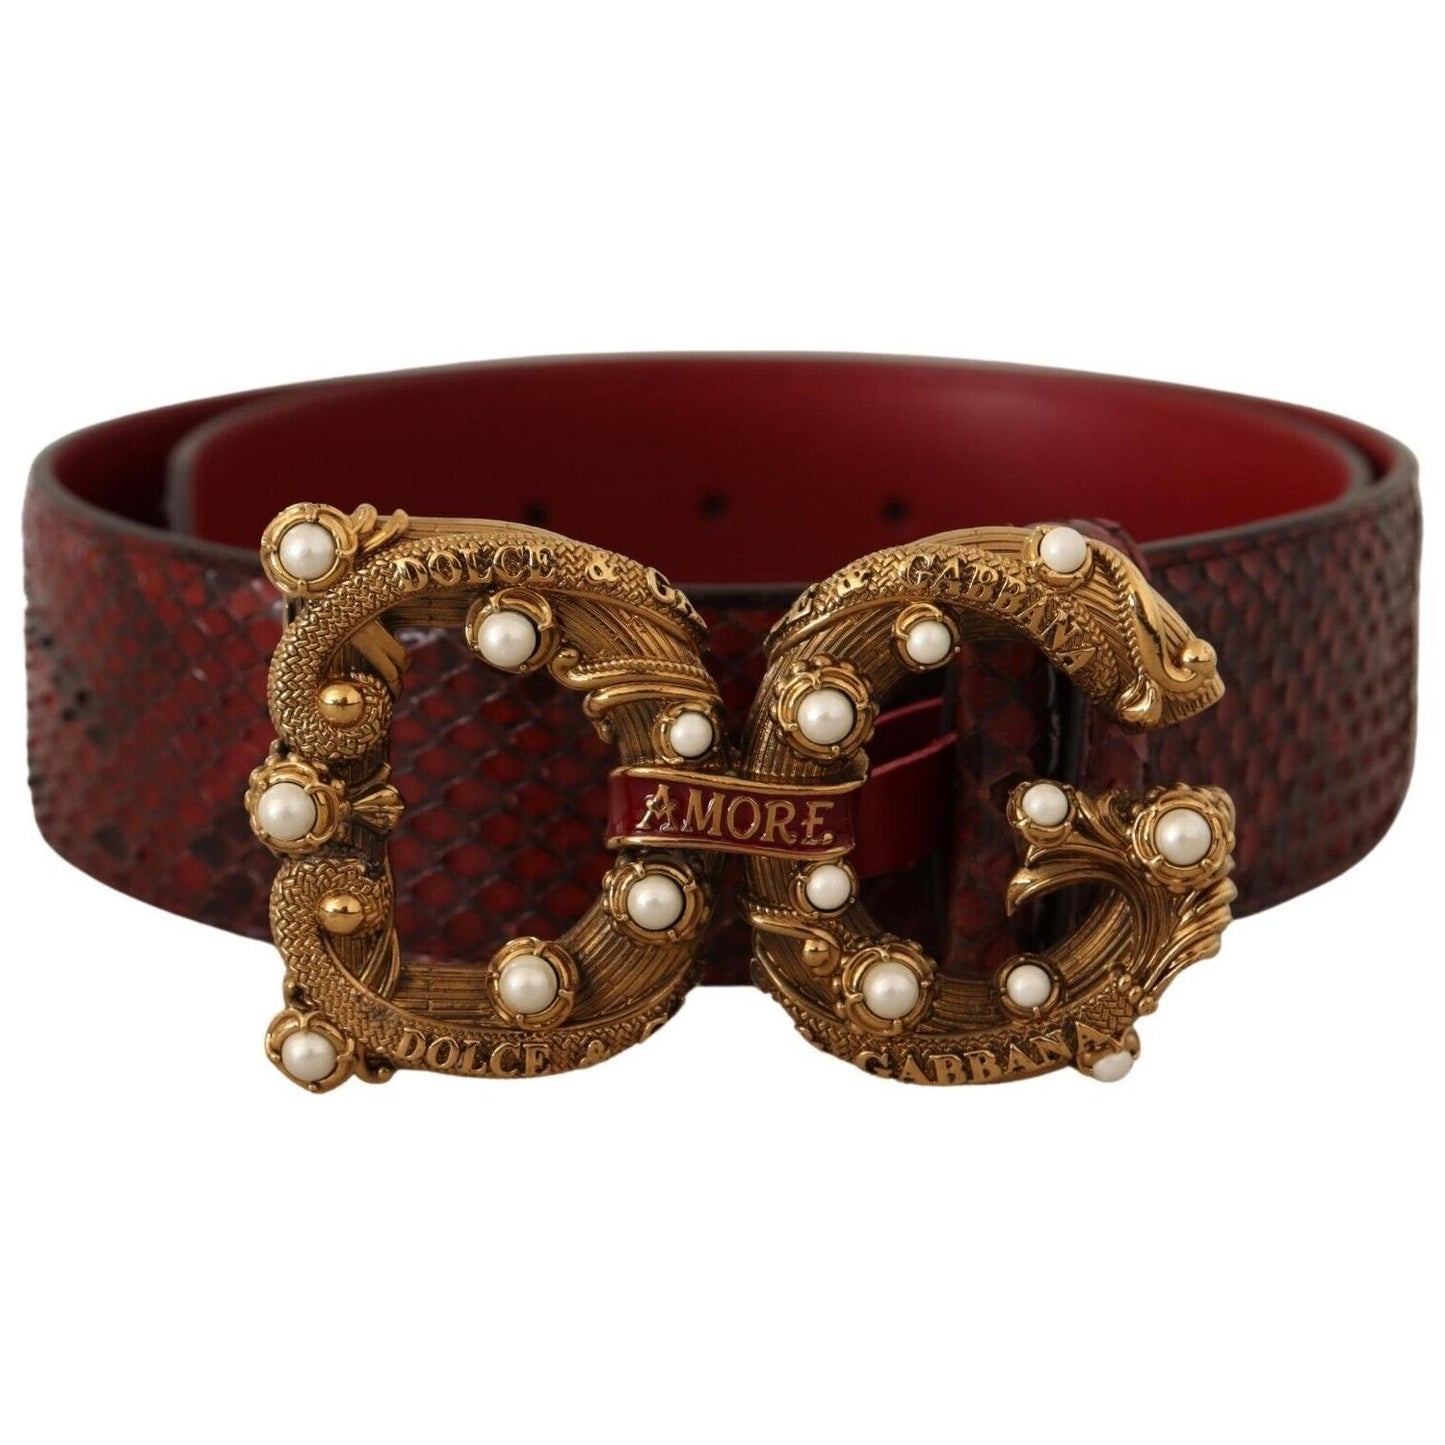 Dolce & Gabbana Exotic Python Leather Belt with Vintage Brass Buckle exotic-python-leather-belt-with-vintage-brass-buckle